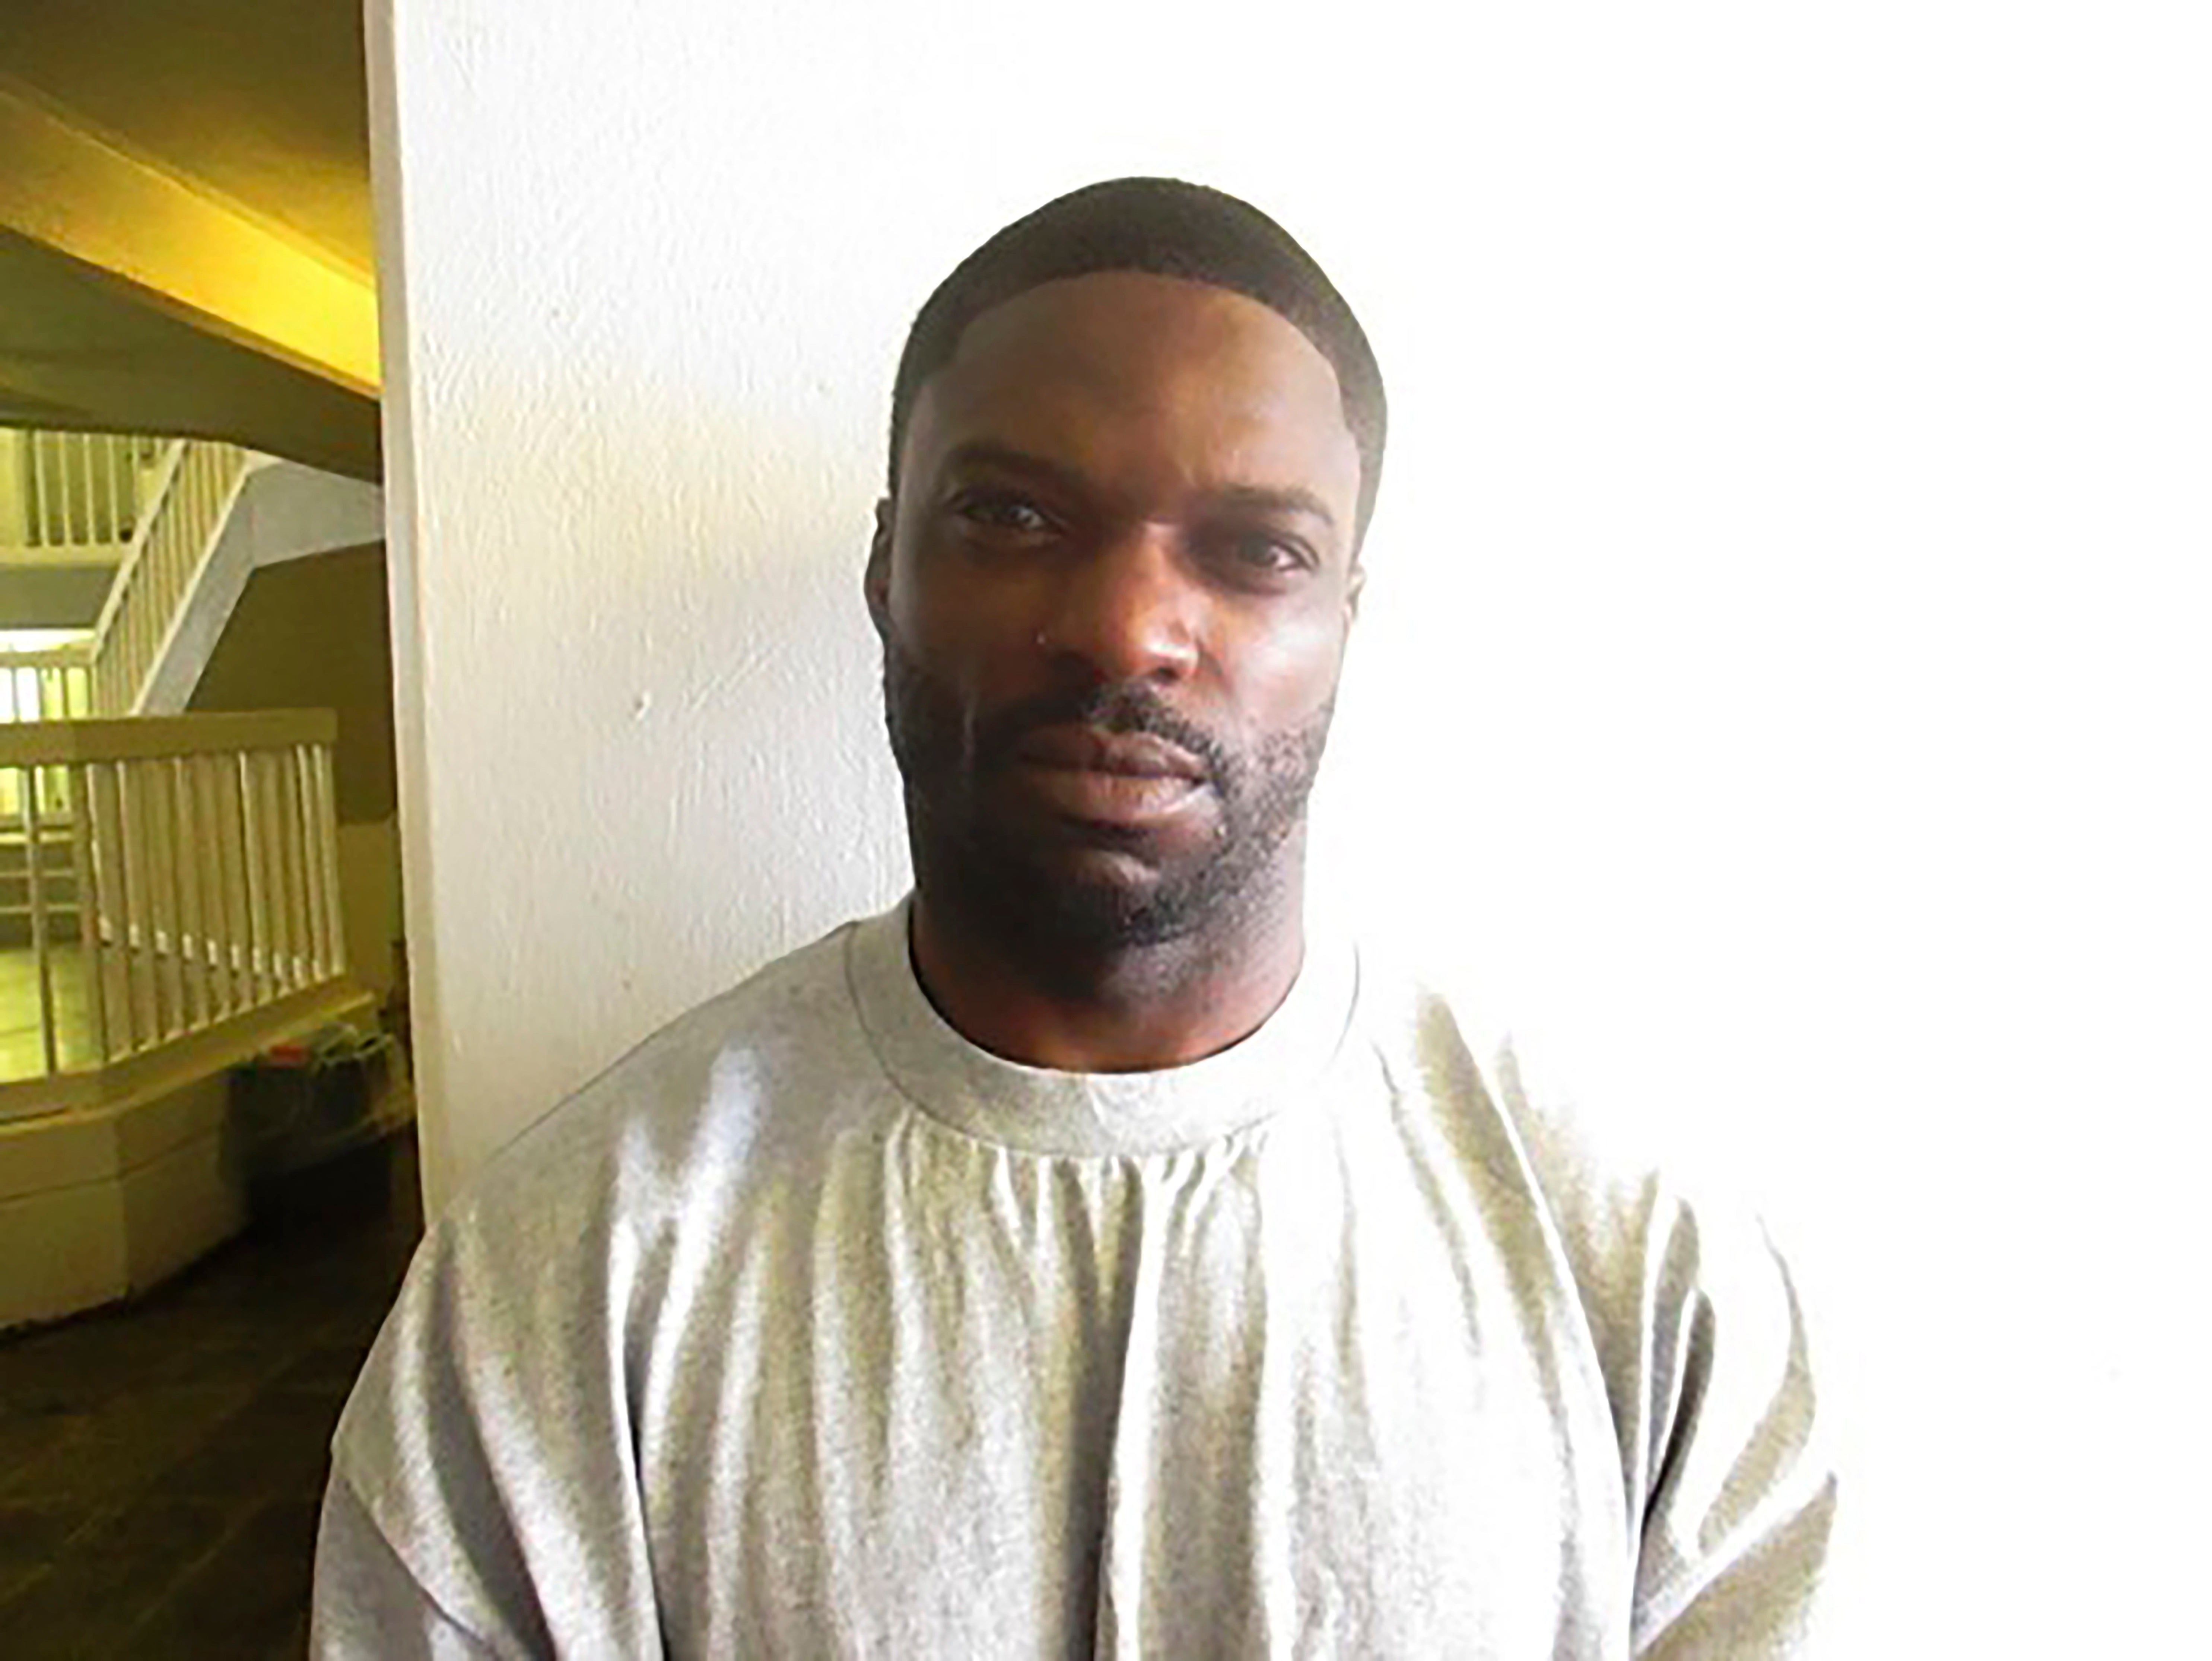 This February 2021 photo provided by the Oklahoma Department of Corrections shows Michael Dewayne Smith